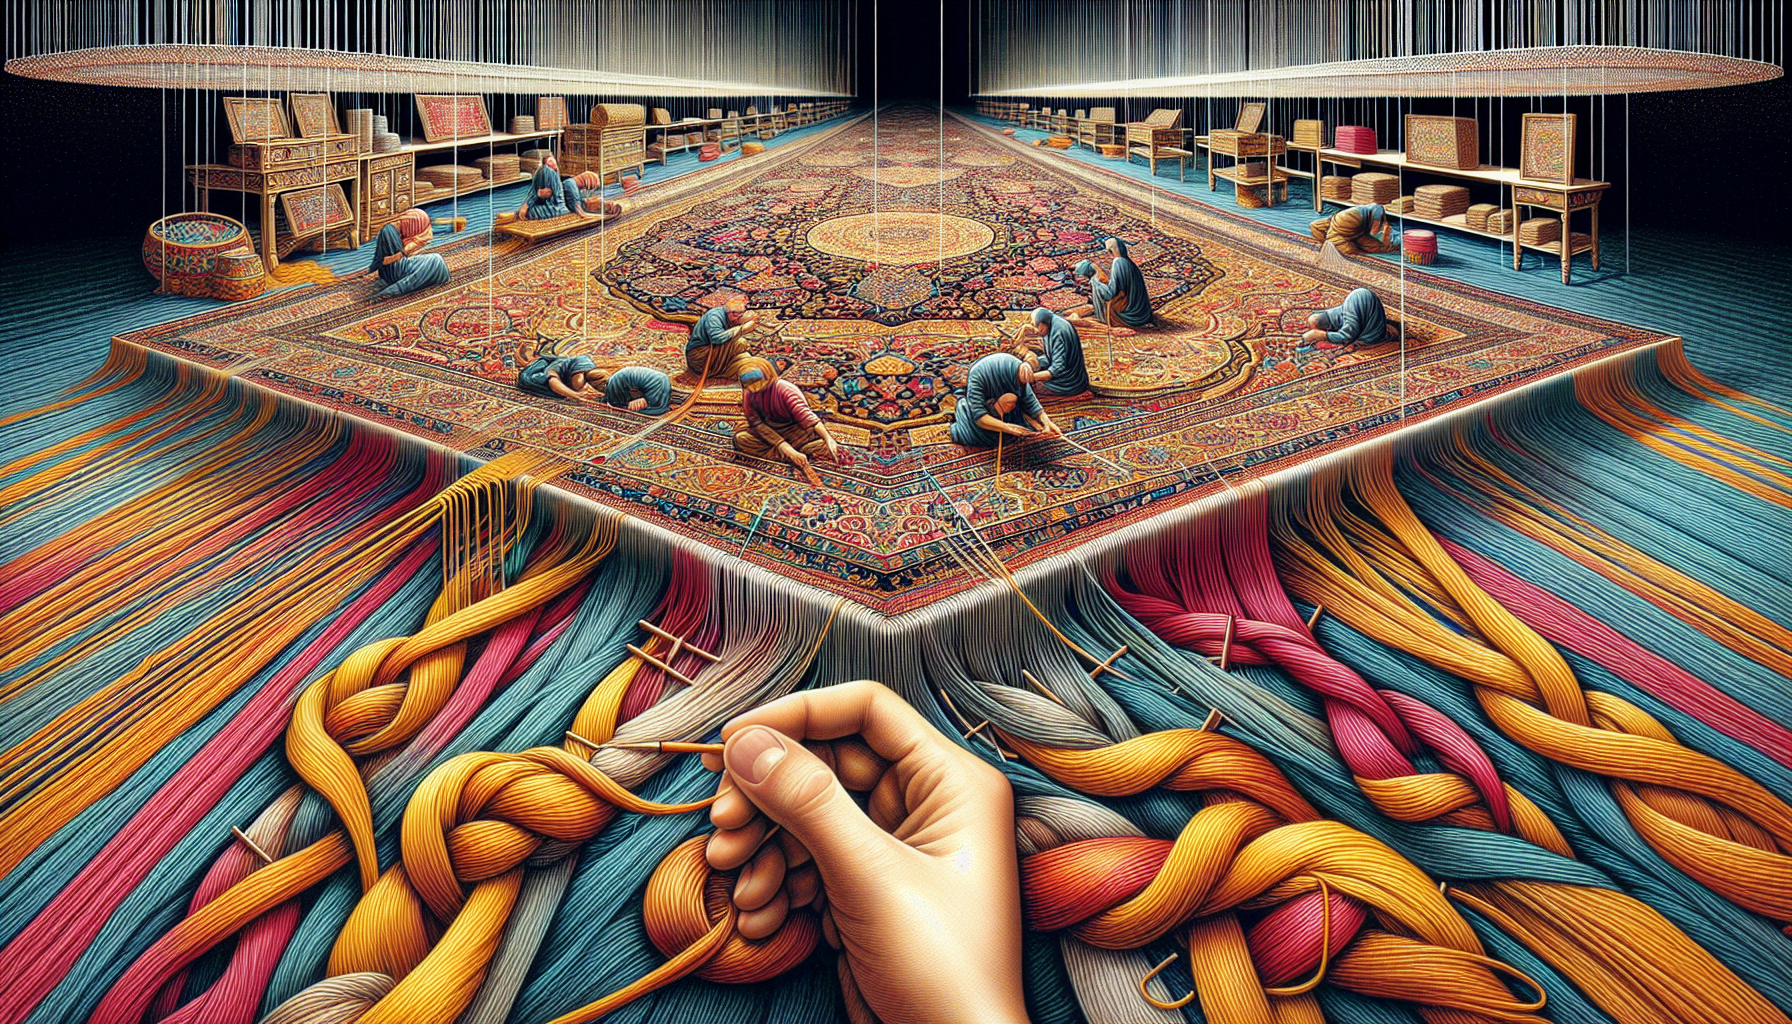 Illustration of the knotting process in Persian rugs, showcasing the symmetrical Turkish (Ghiordes) knot and the asymmetrical Persian (Senneh) knot